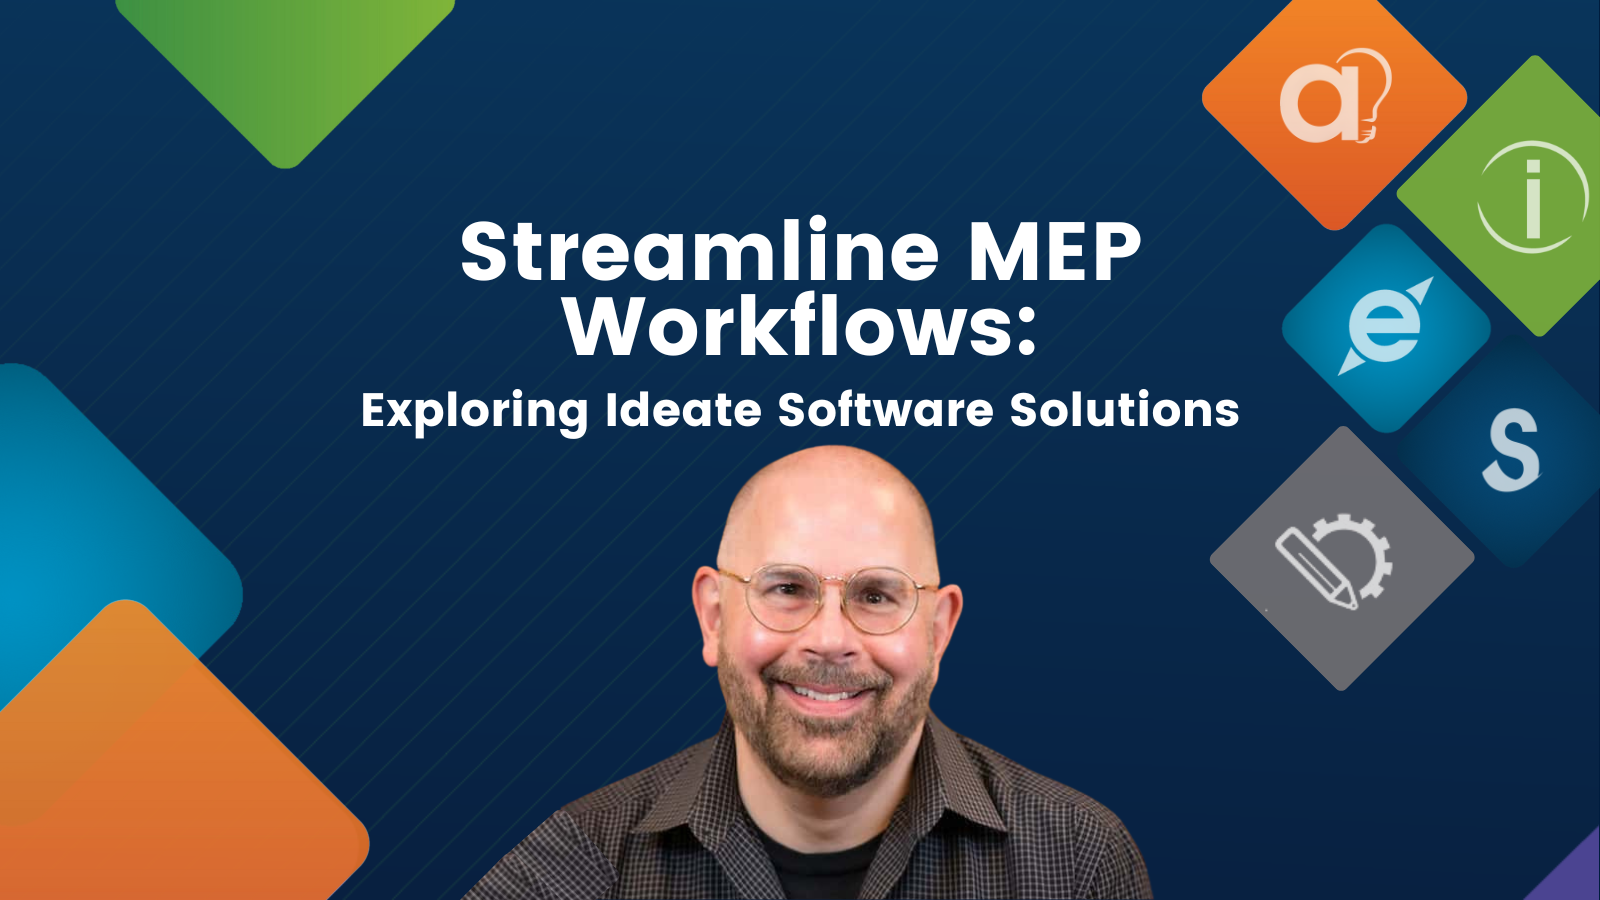 Streamline MEP Workflows: Exploring Ideate Software Solutions